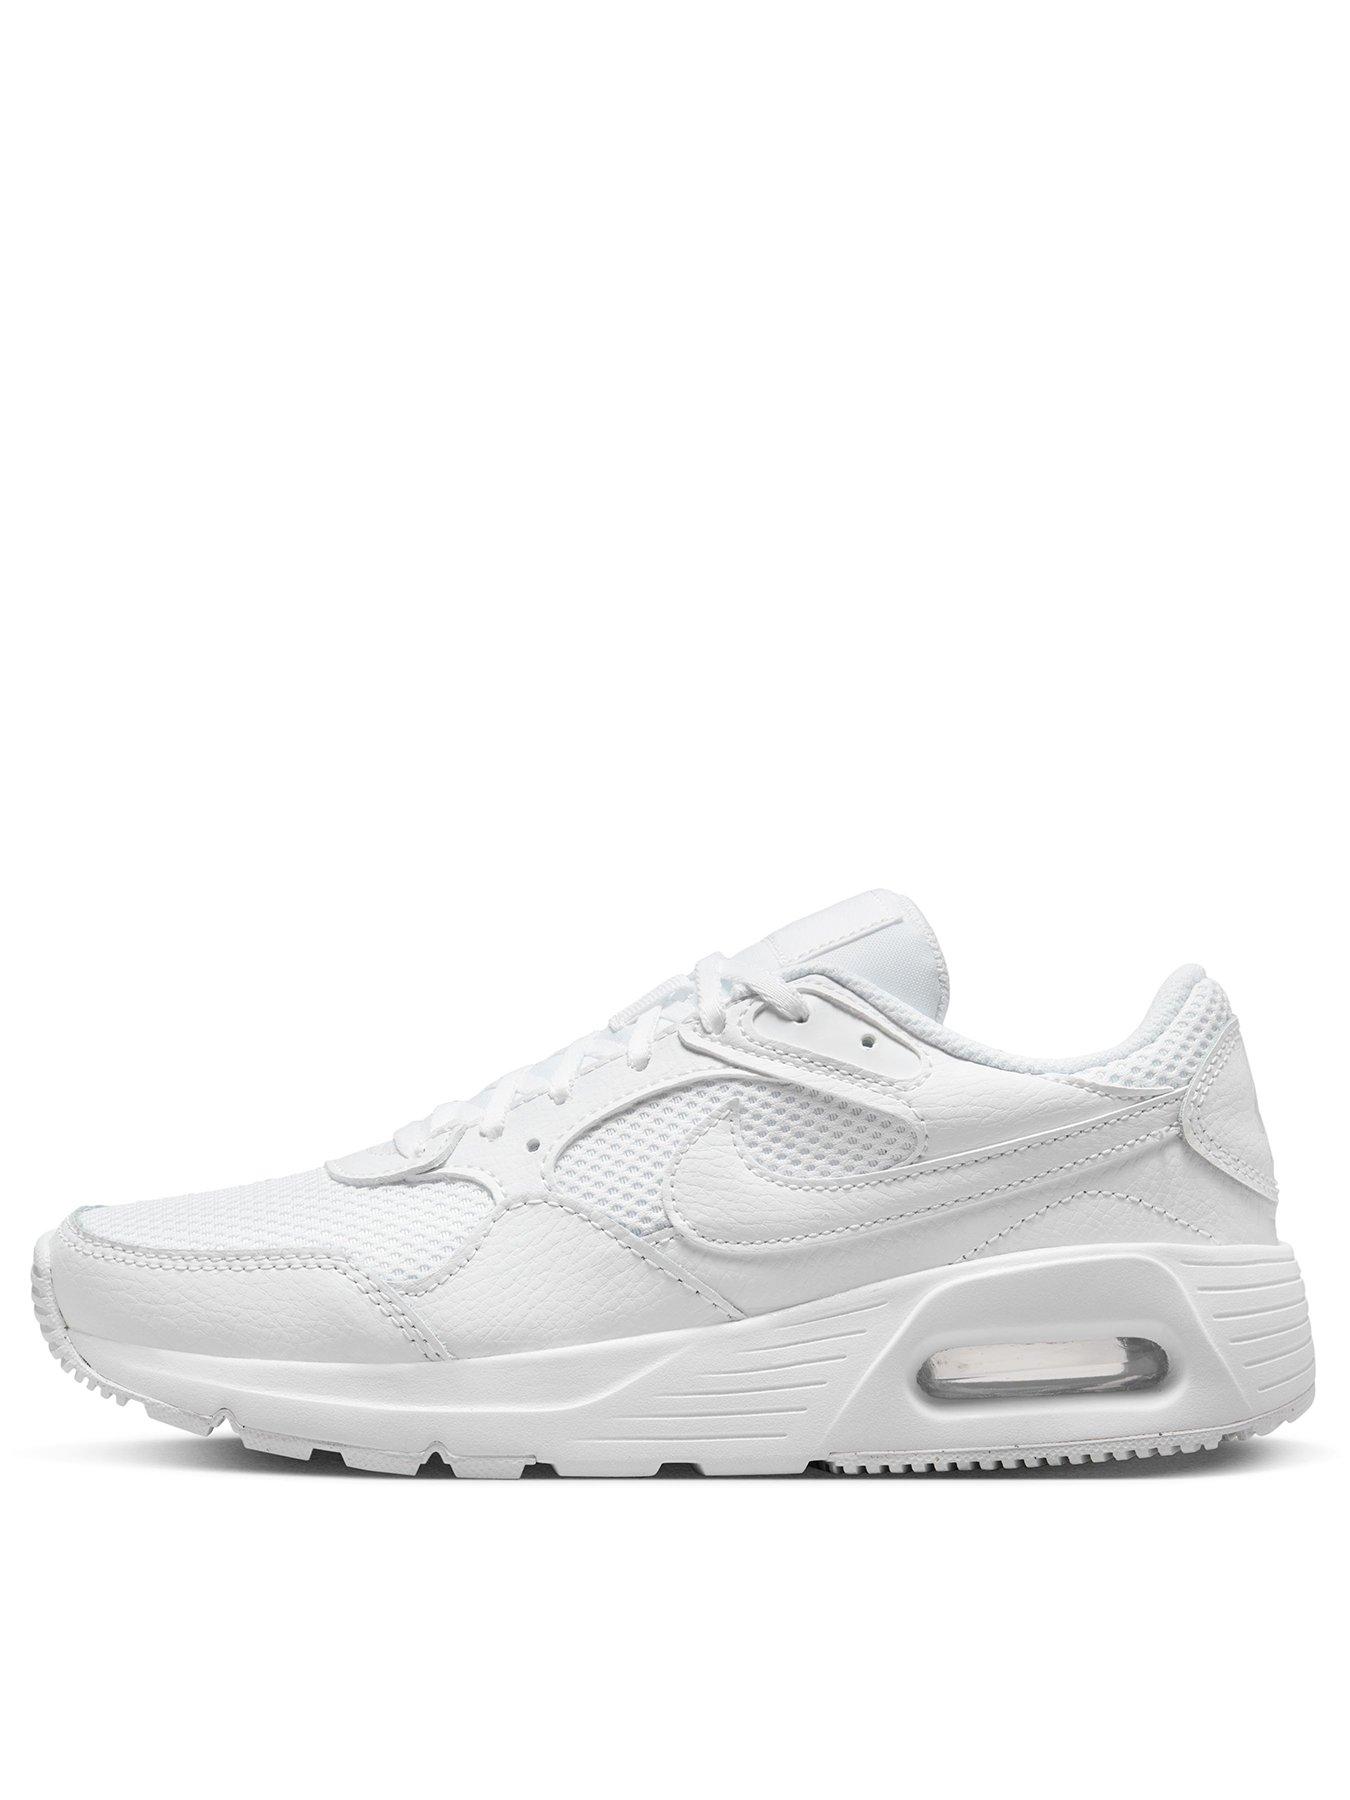 Nike Air Max SC Trainers - White | littlewoods.com